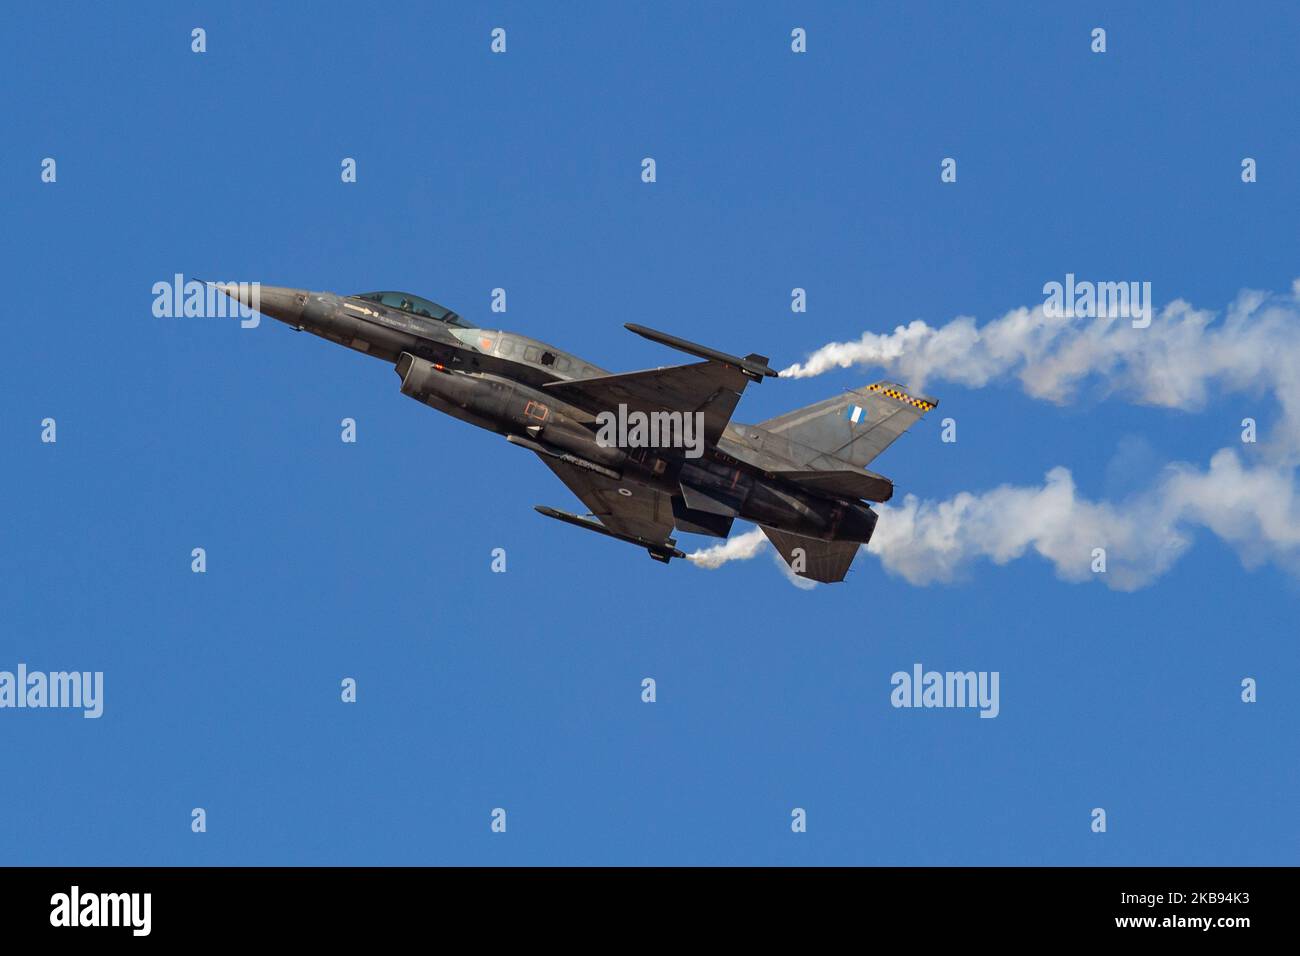 Greek HAF F16 ' Zeus ' Demo Team during the Athens Flying Week 2019 Air Show. Hellenic Air Force Lockheed Martin F-16C Block 52 ( F-16C Blk 52+ ) from 340 Squadron Mira ( 340SQN 'Fox' ) as seen in a flying demonstration from demo pilot Major Georgios Papadakis at Tanagra Military Air Base LGTG airport. Athens, Greece - September 22, 2019 (Photo by Nicolas Economou/NurPhoto) Stock Photo